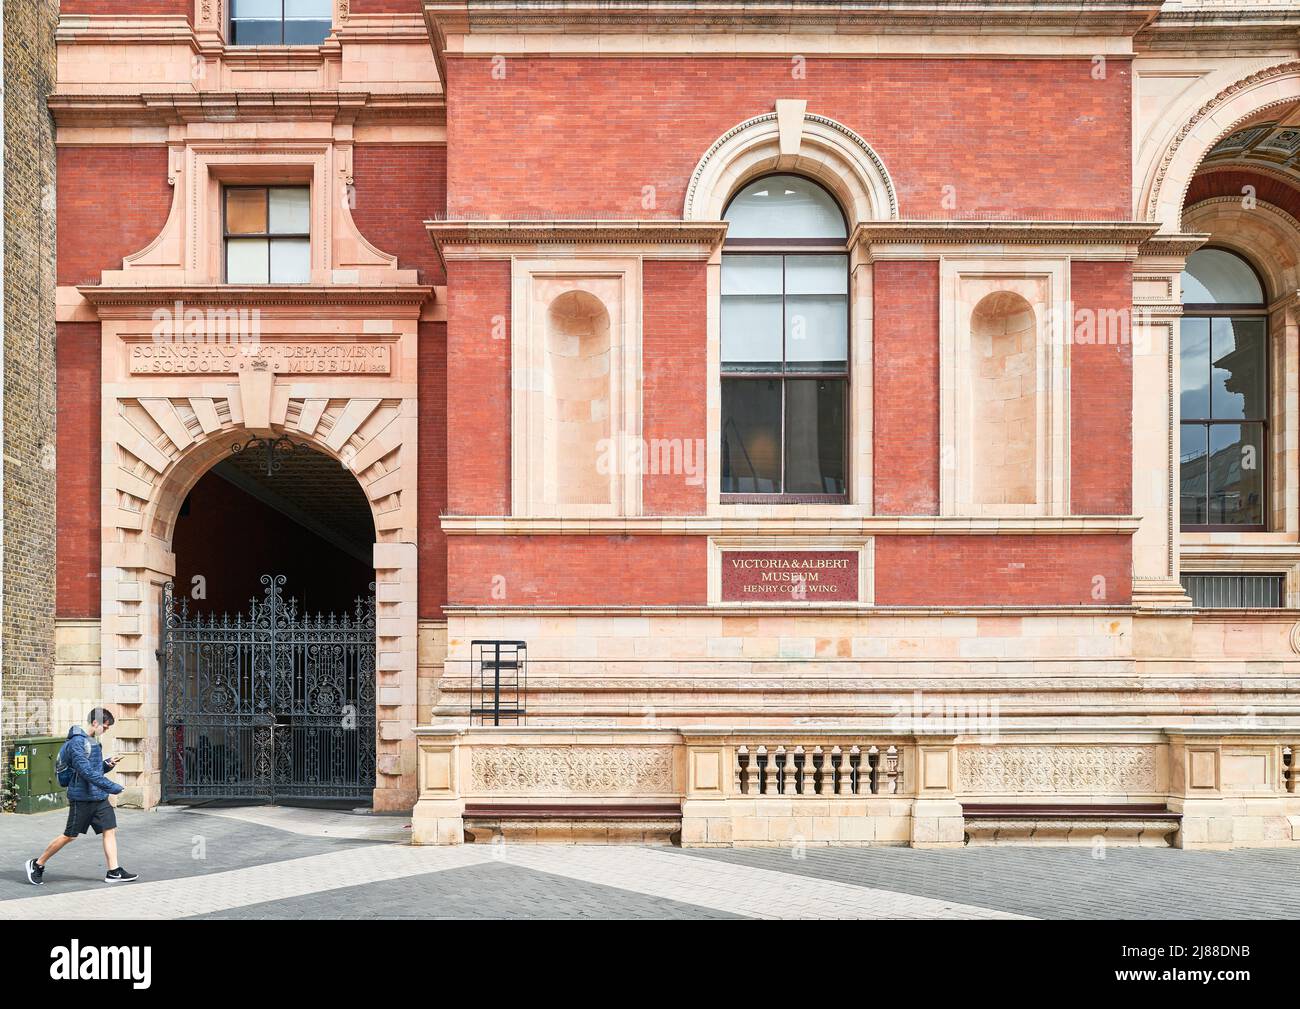 The Henry Cole wing of the Victoria and Albert museum, London, England. Stock Photo